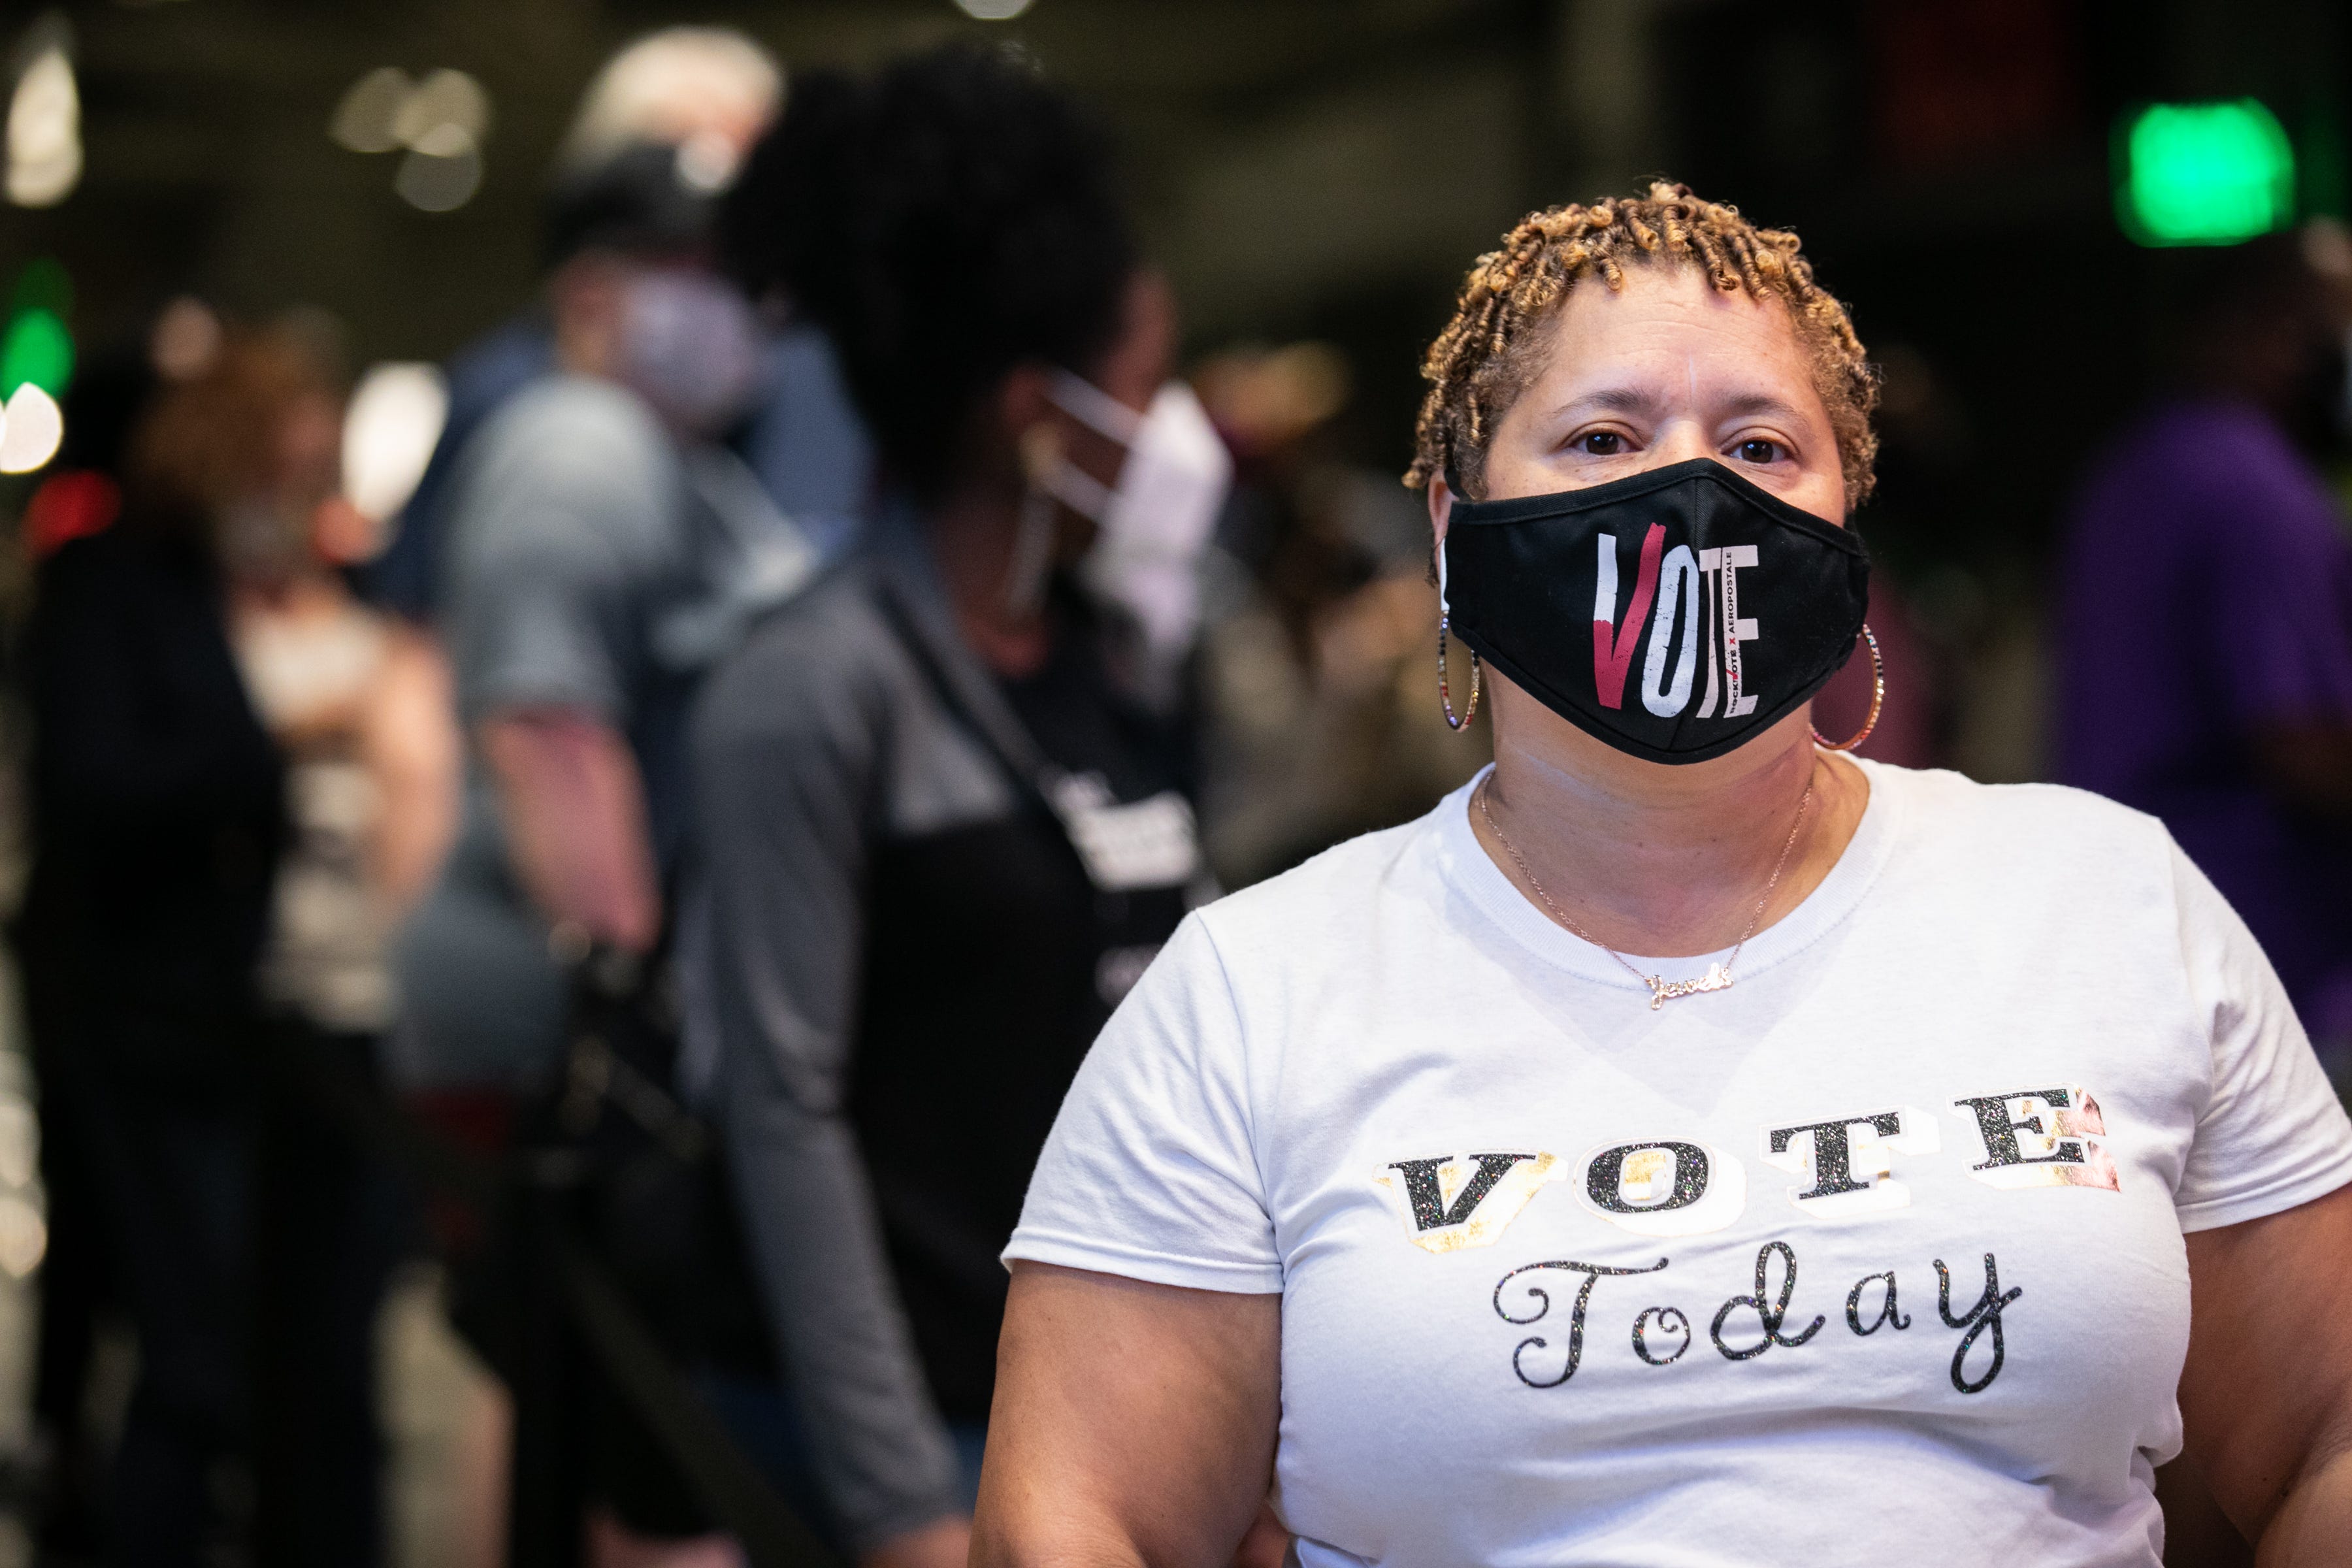 Heather King waits in line at State Farm Arena, Georgia's largest early voting location, to cast her ballot during the first day of early voting in the general election on Oct. 12, 2020 in Atlanta.